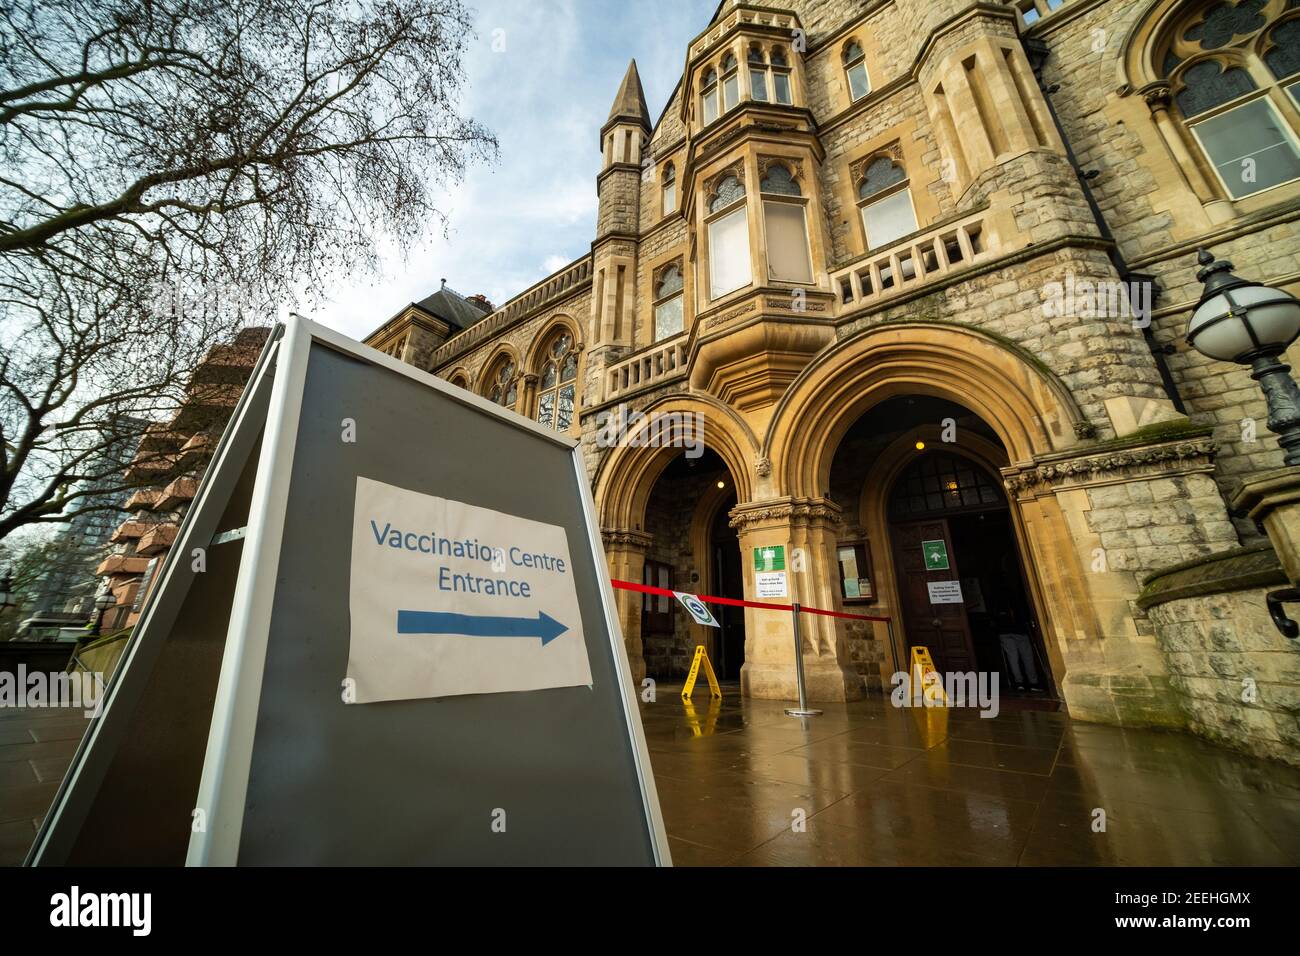 London- February, 2021: Covid 19 NHS Vaccination Centre in Ealing, West London Stock Photo